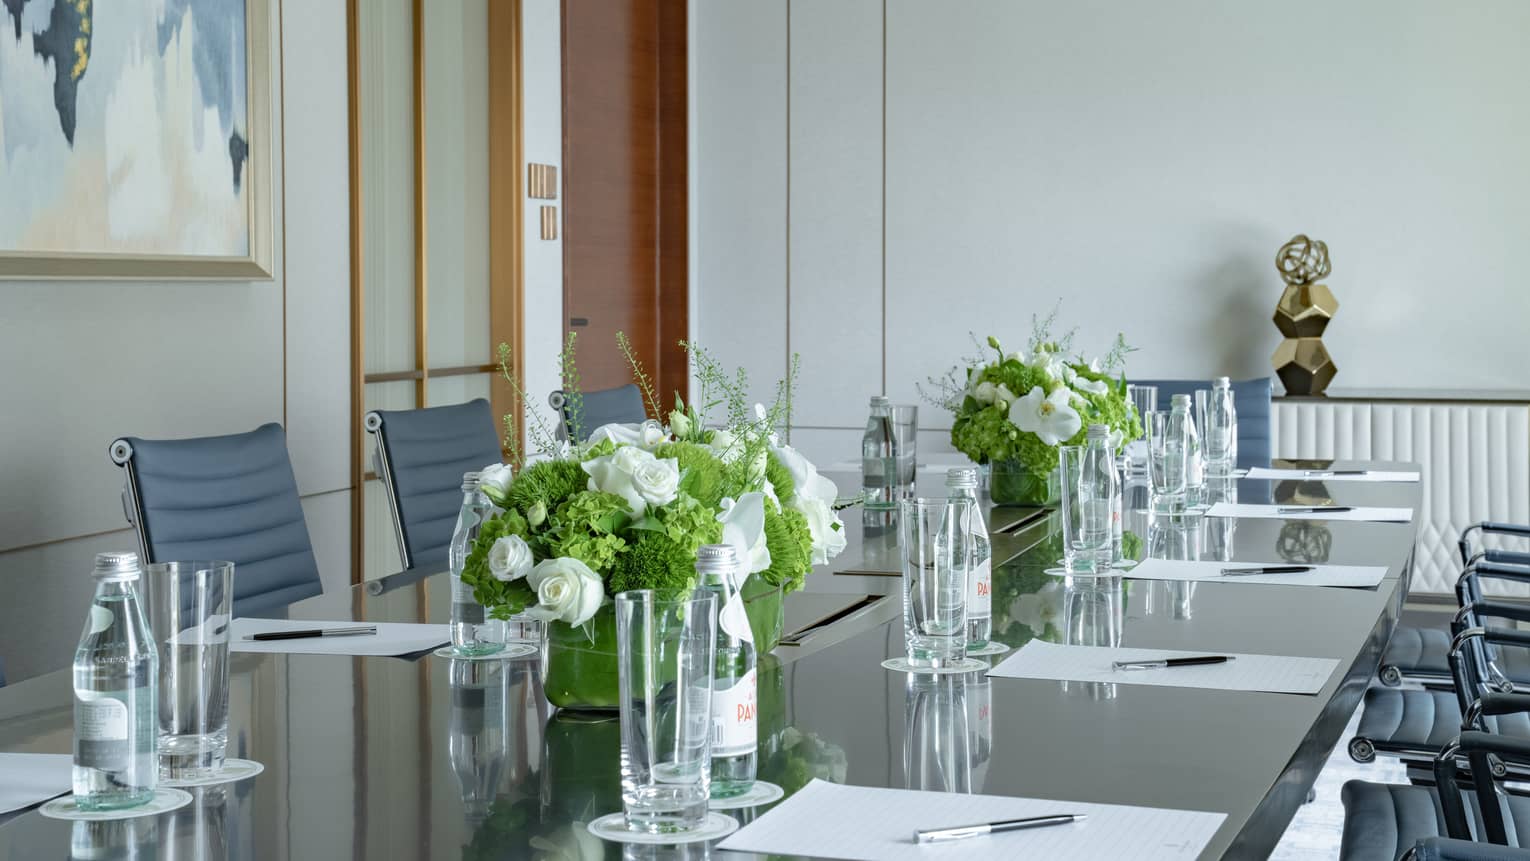 Meeting room with long boardroom table set with papers and pens, floral arrangements, bottles of water